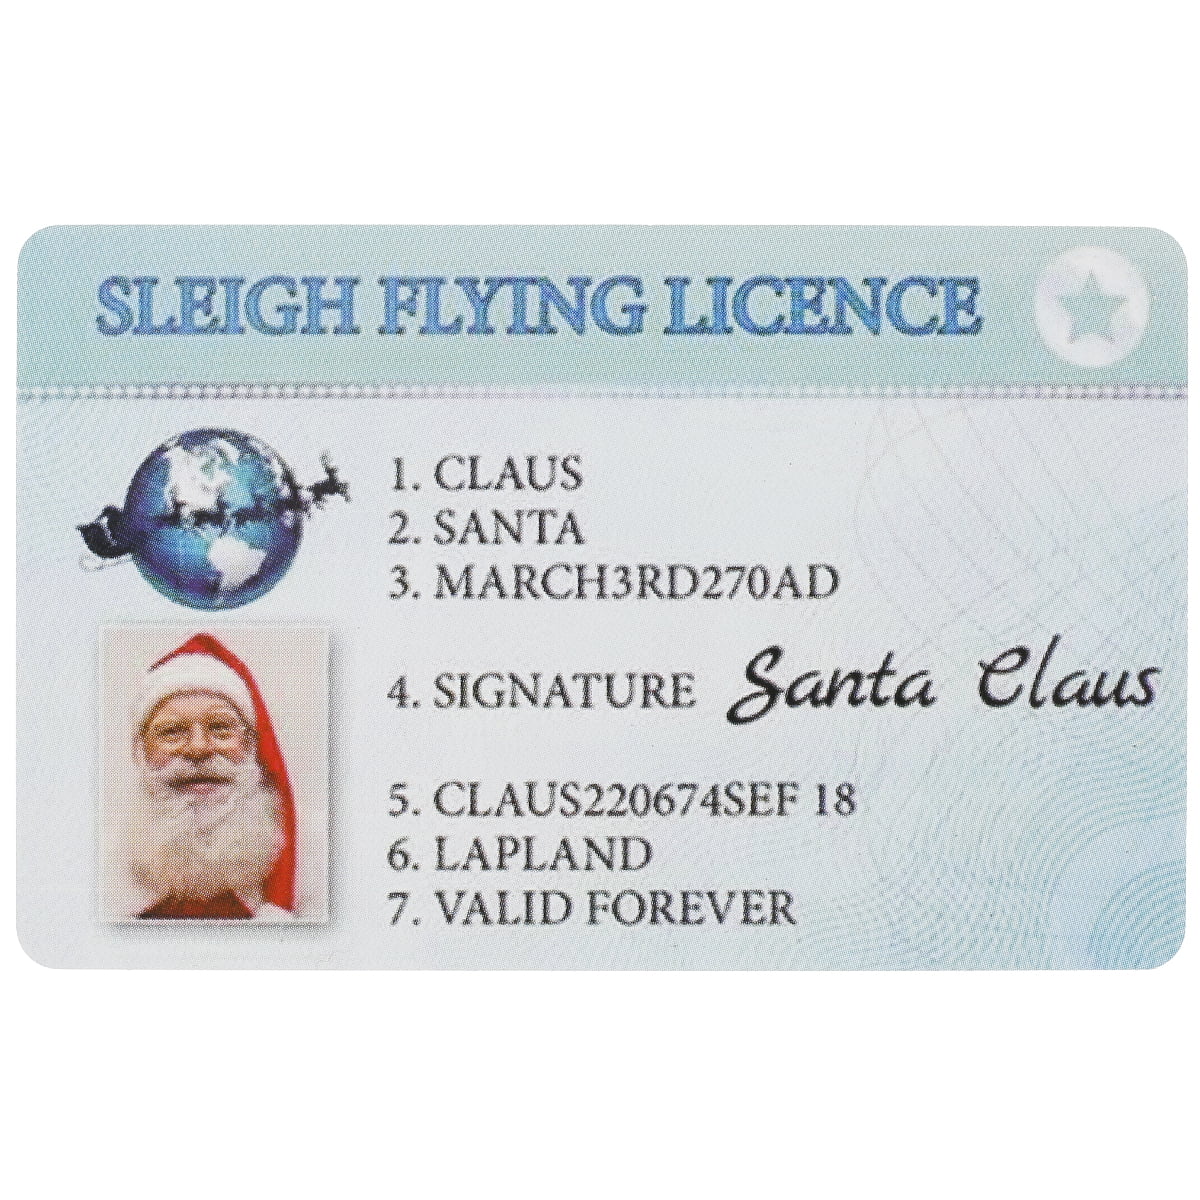 Santa Claus Lost Driving License Christmas Eve Sled License Creative Xmas Novelty License Card for Christmas Tree Decorations Style B